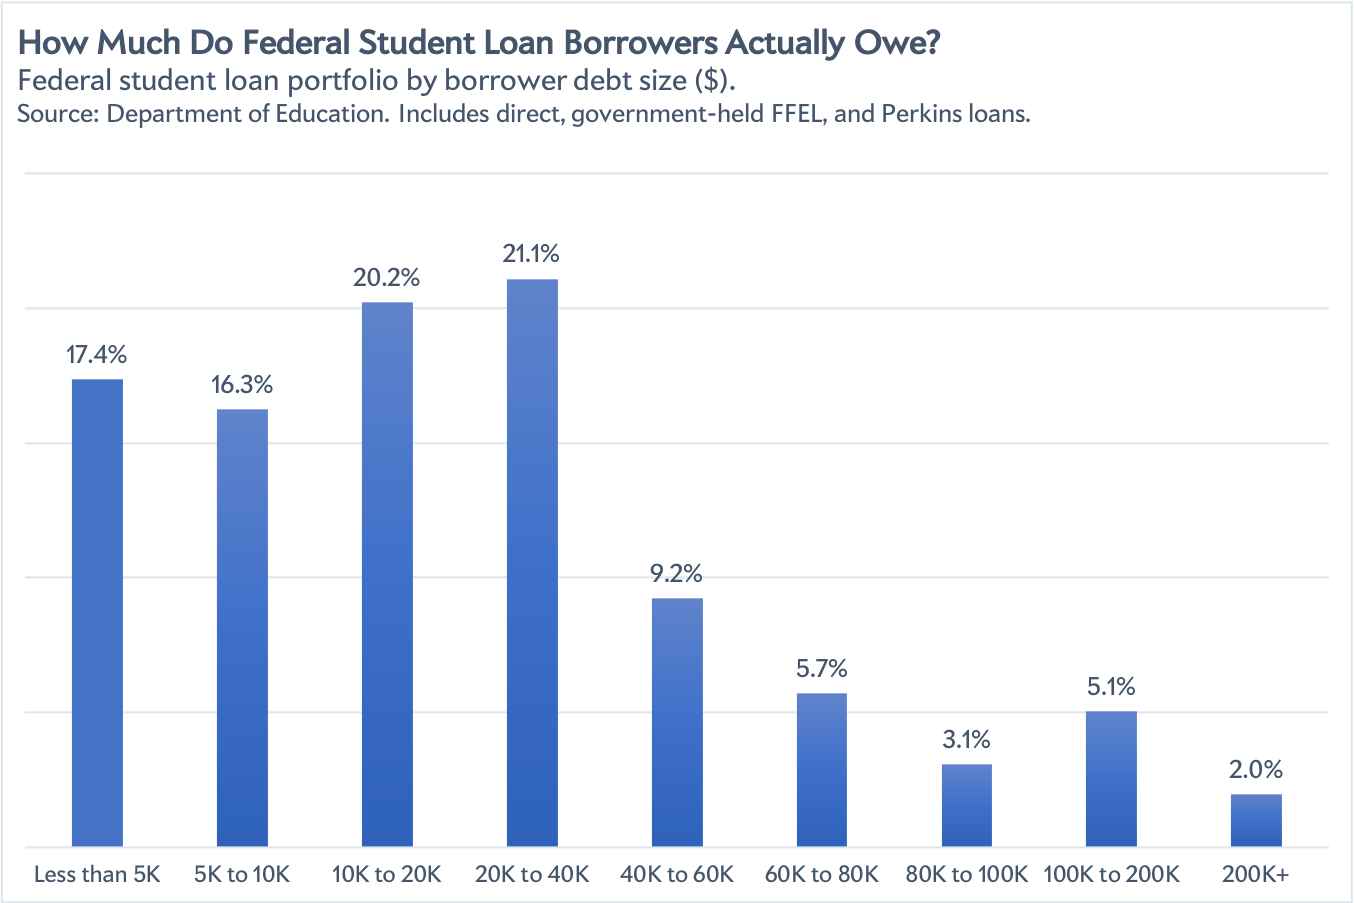 A chart showing how much federal student loan holders actually owe.